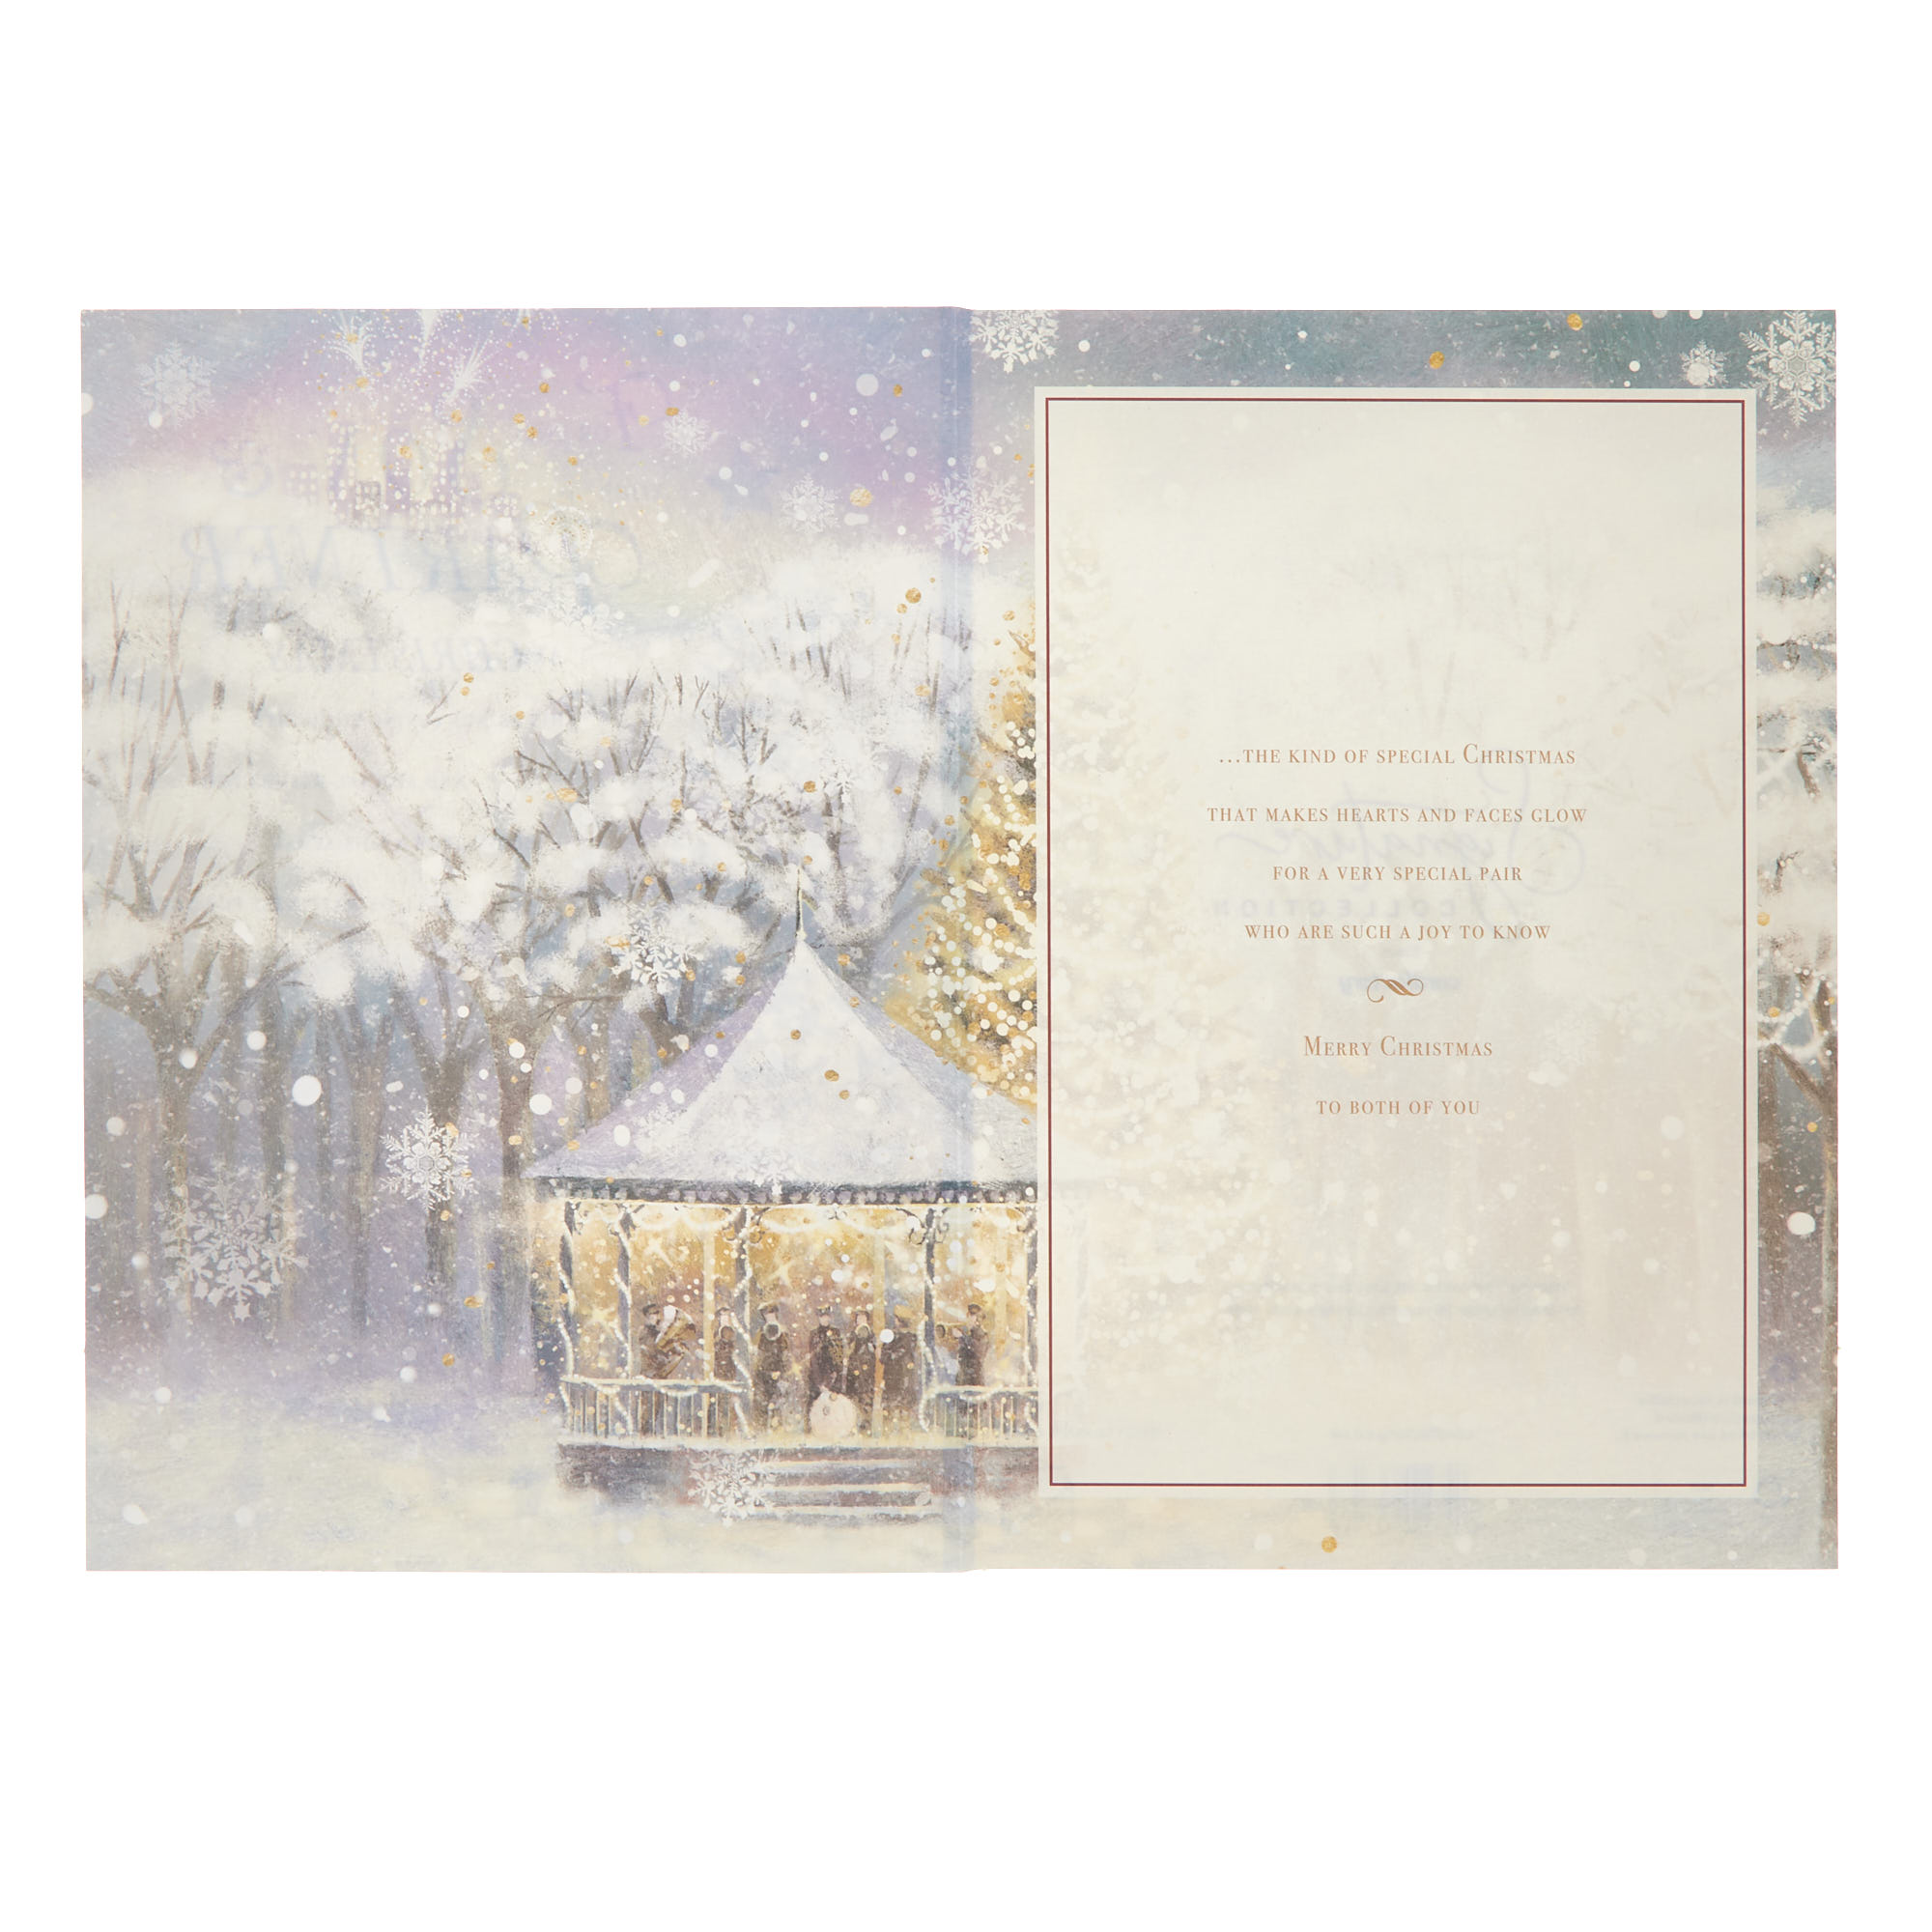 Son & Your Partner Winter Bandstand Christmas Card